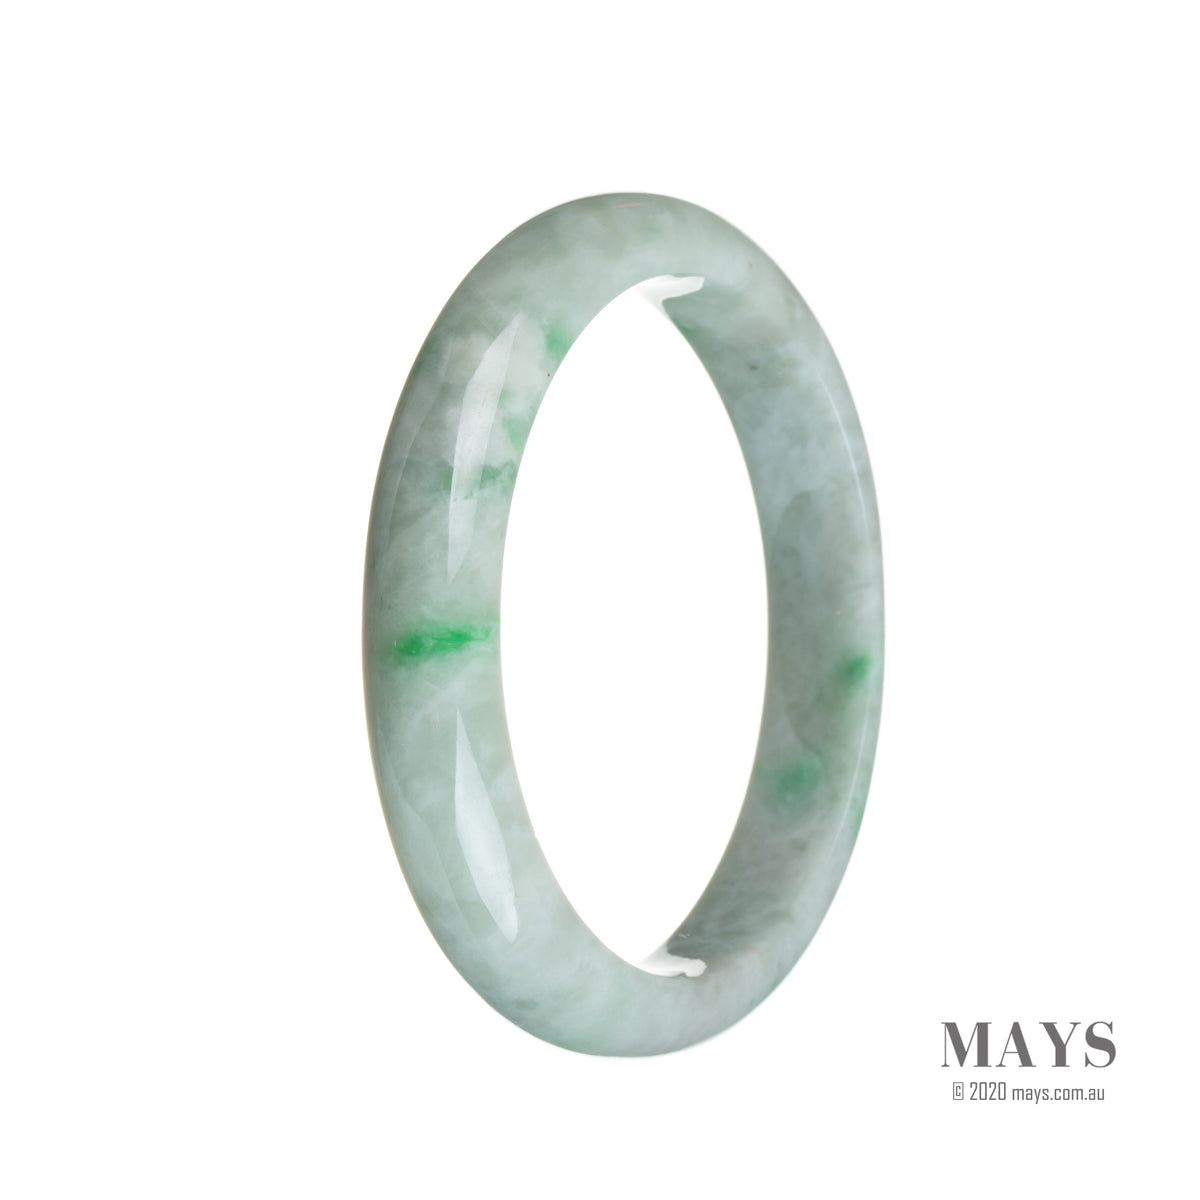 A beautiful green and white patterned jade bracelet in a half moon shape, perfect for adding a touch of elegance to any outfit.